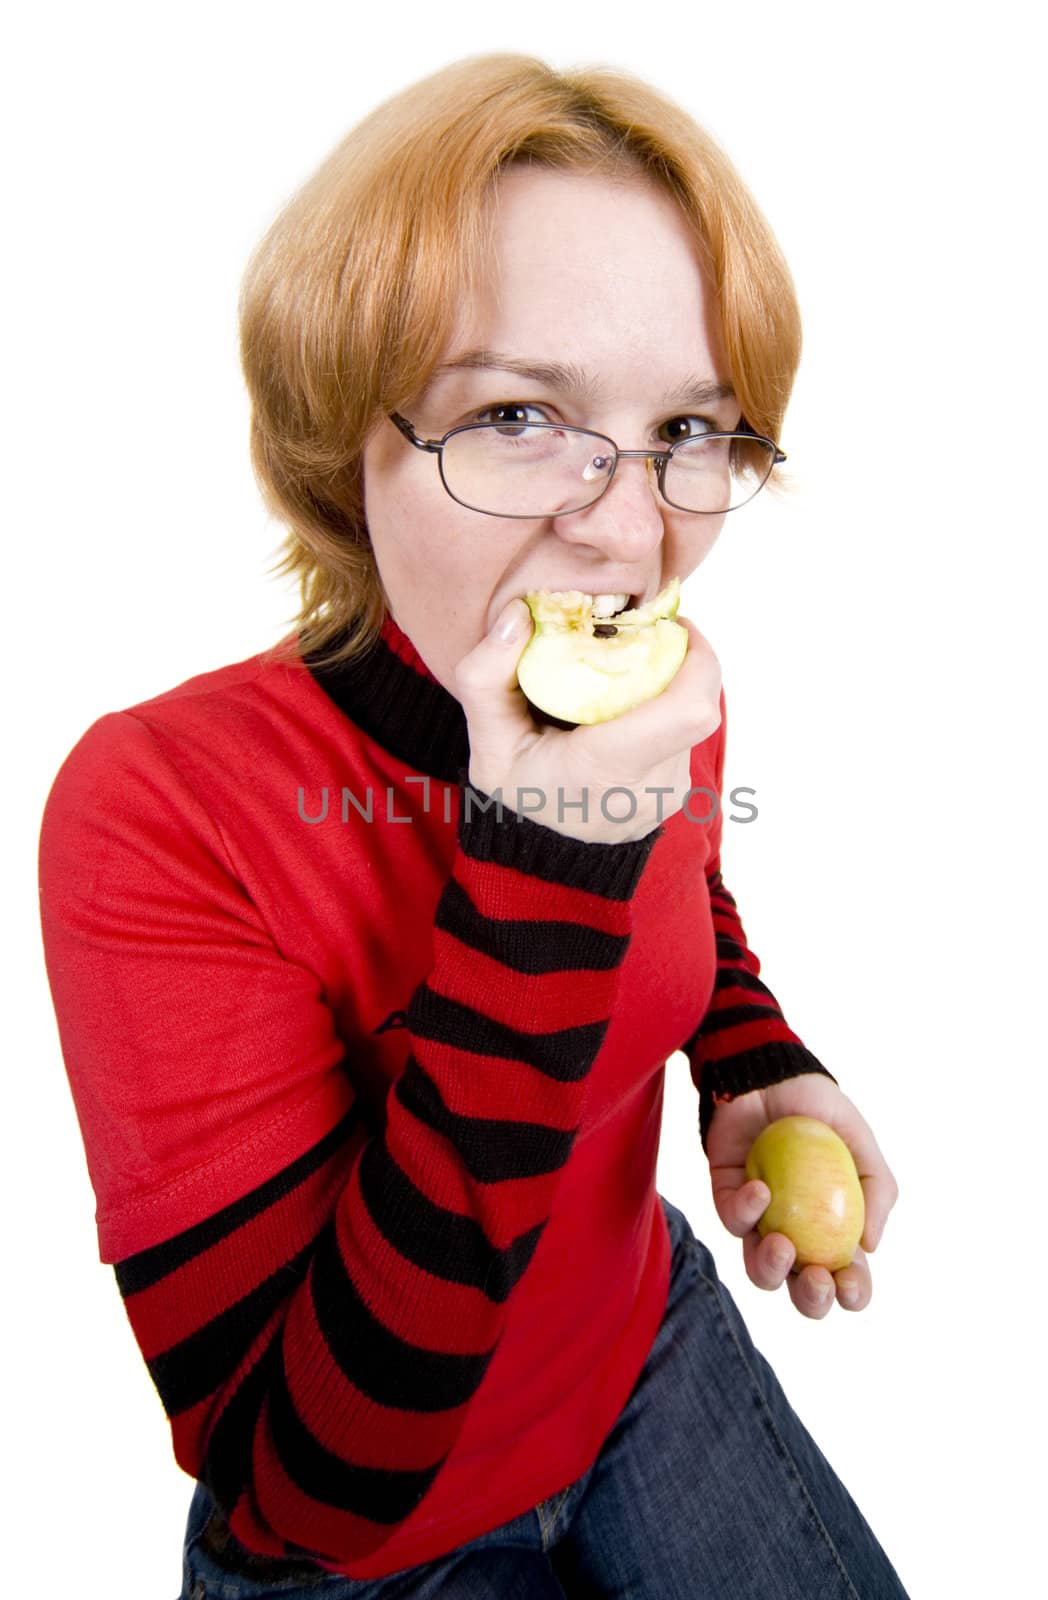 The girl in a red sweater eats an two apples